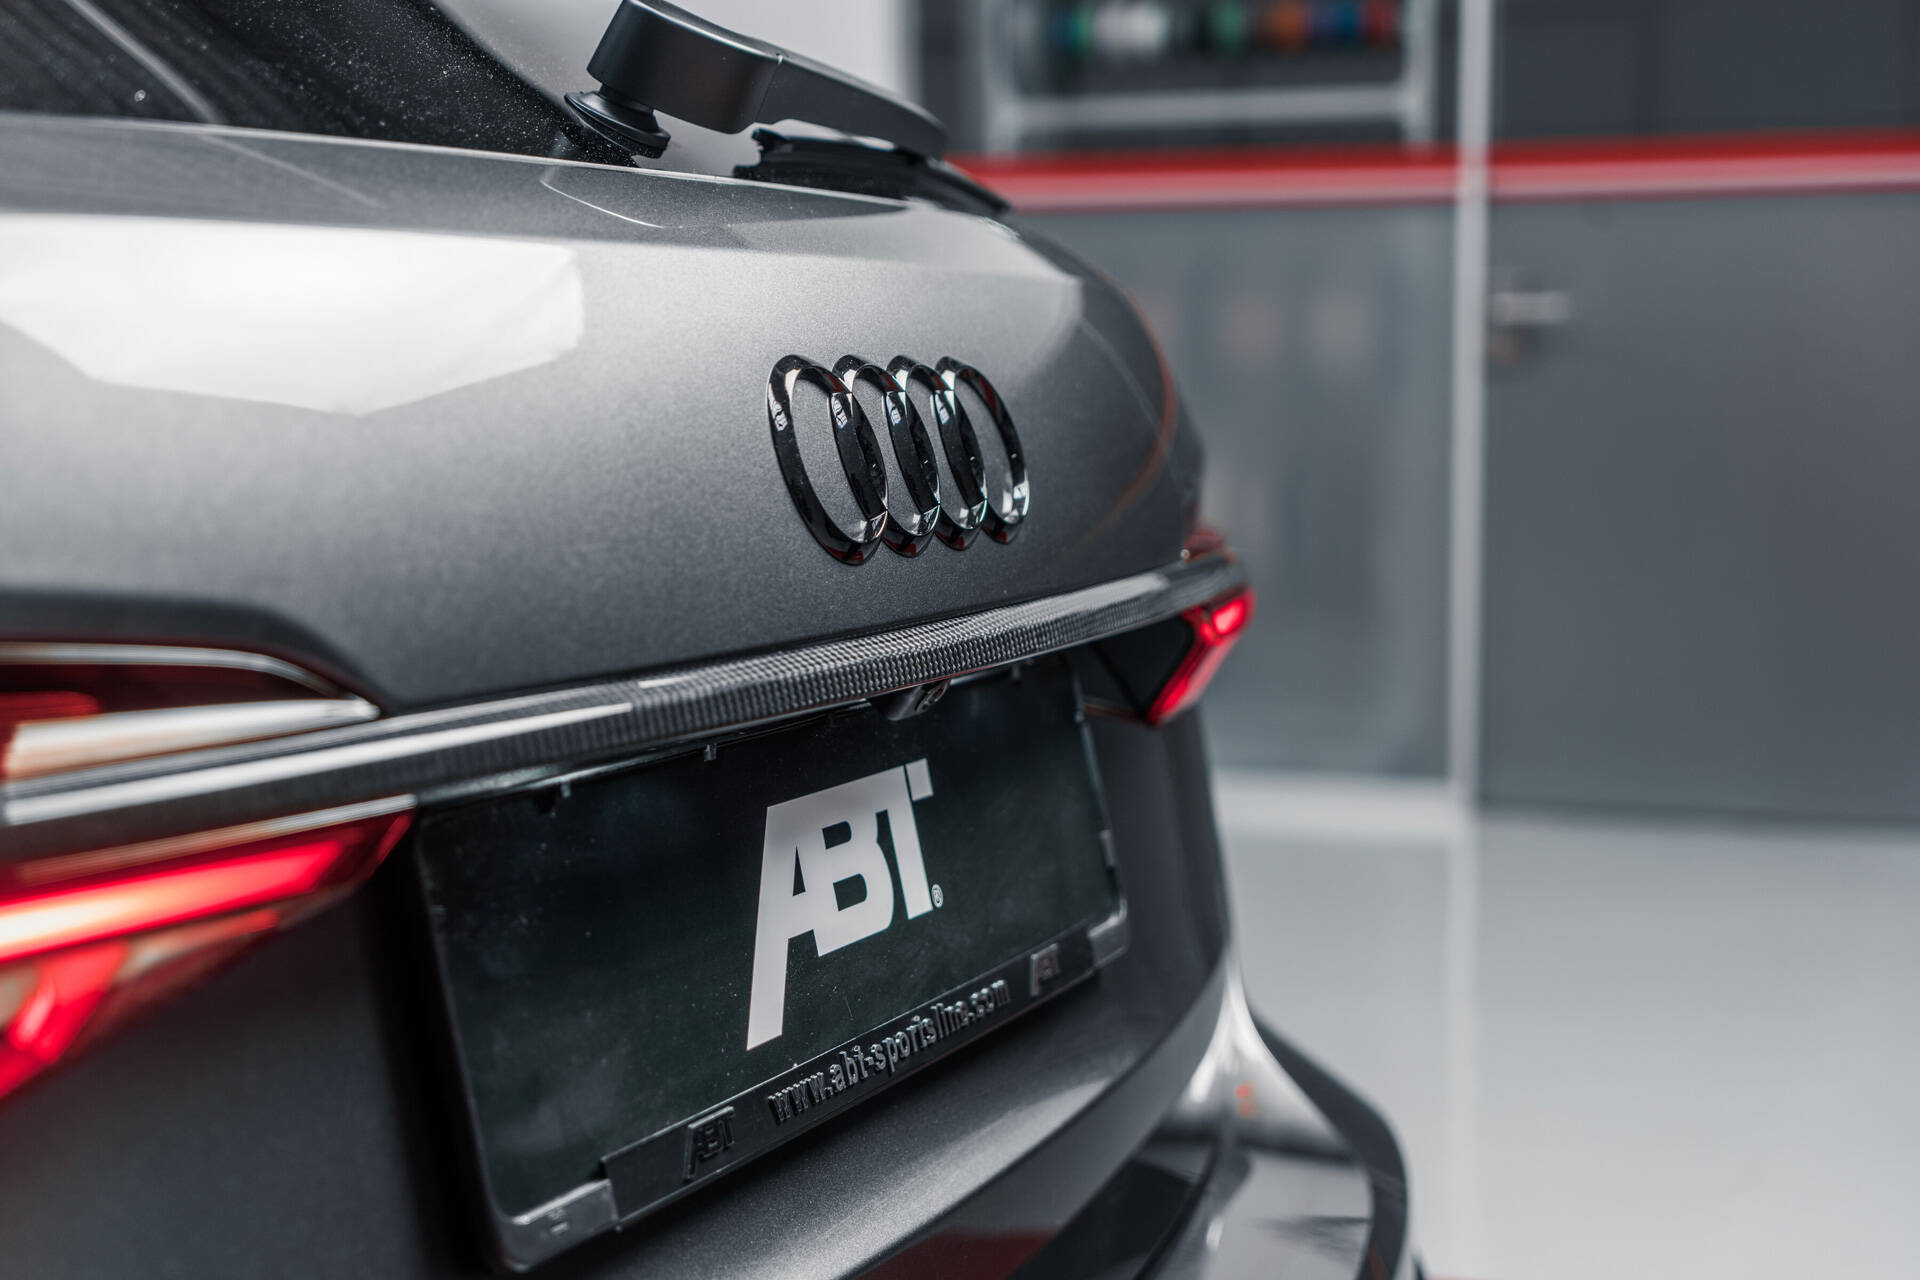 Selected aesthetic ABT carbon fiber parts for Audi RS6, A7, S7 and RS7  available through Audi dealers directly - Audi Tuning, VW Tuning,  Chiptuning von ABT Sportsline.